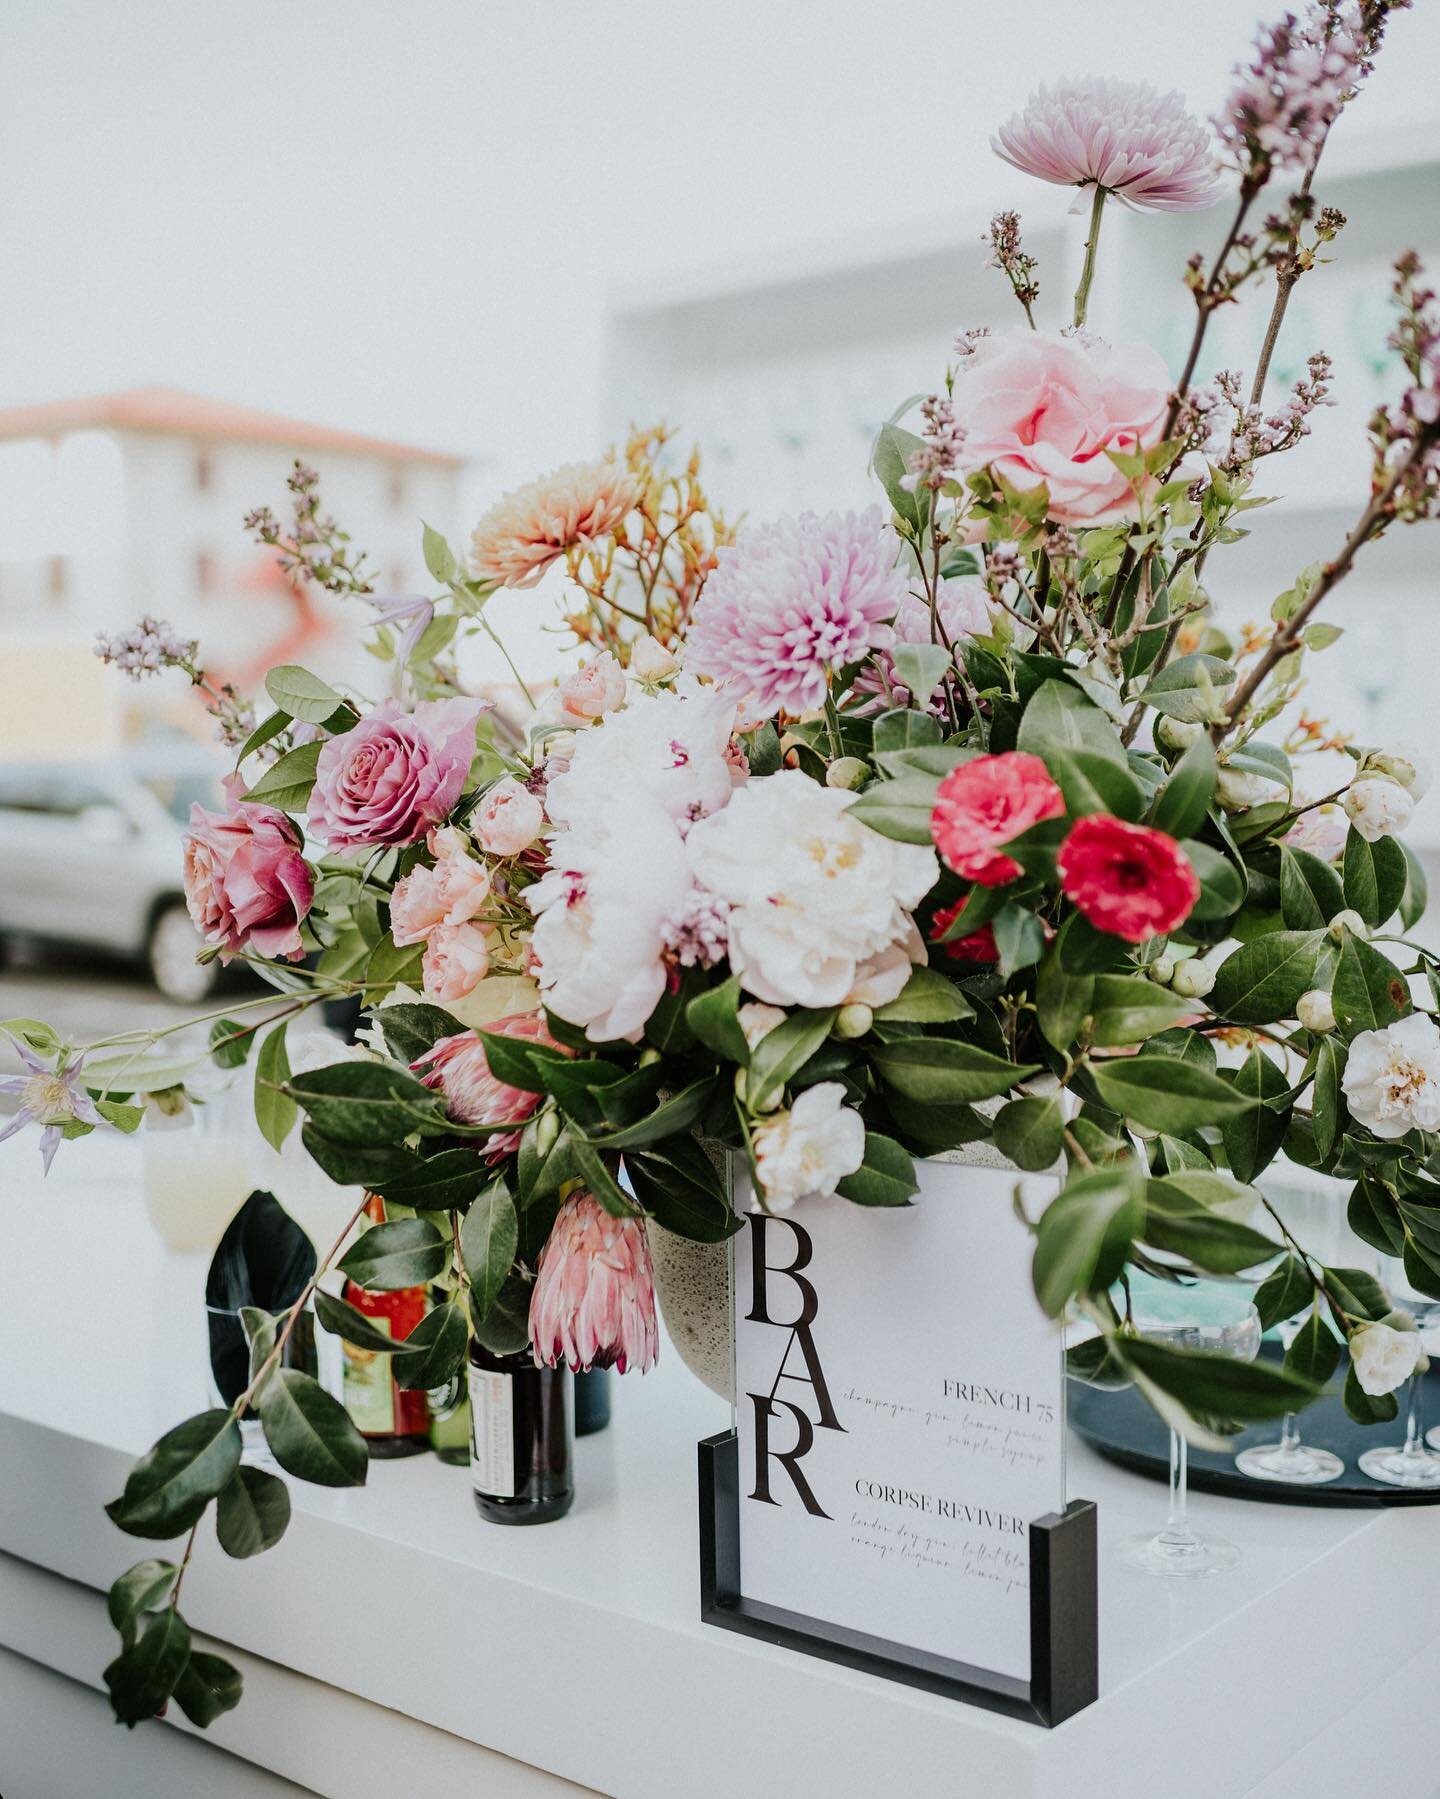 When the florals make the modern minimalistic signage come alive 😍 loved all the details for this special day Photographer: @shannonrosan Planning/Design: @atlas_designstudio  Florals: @ampersand_sf 
Venue: @fortmasoncenter